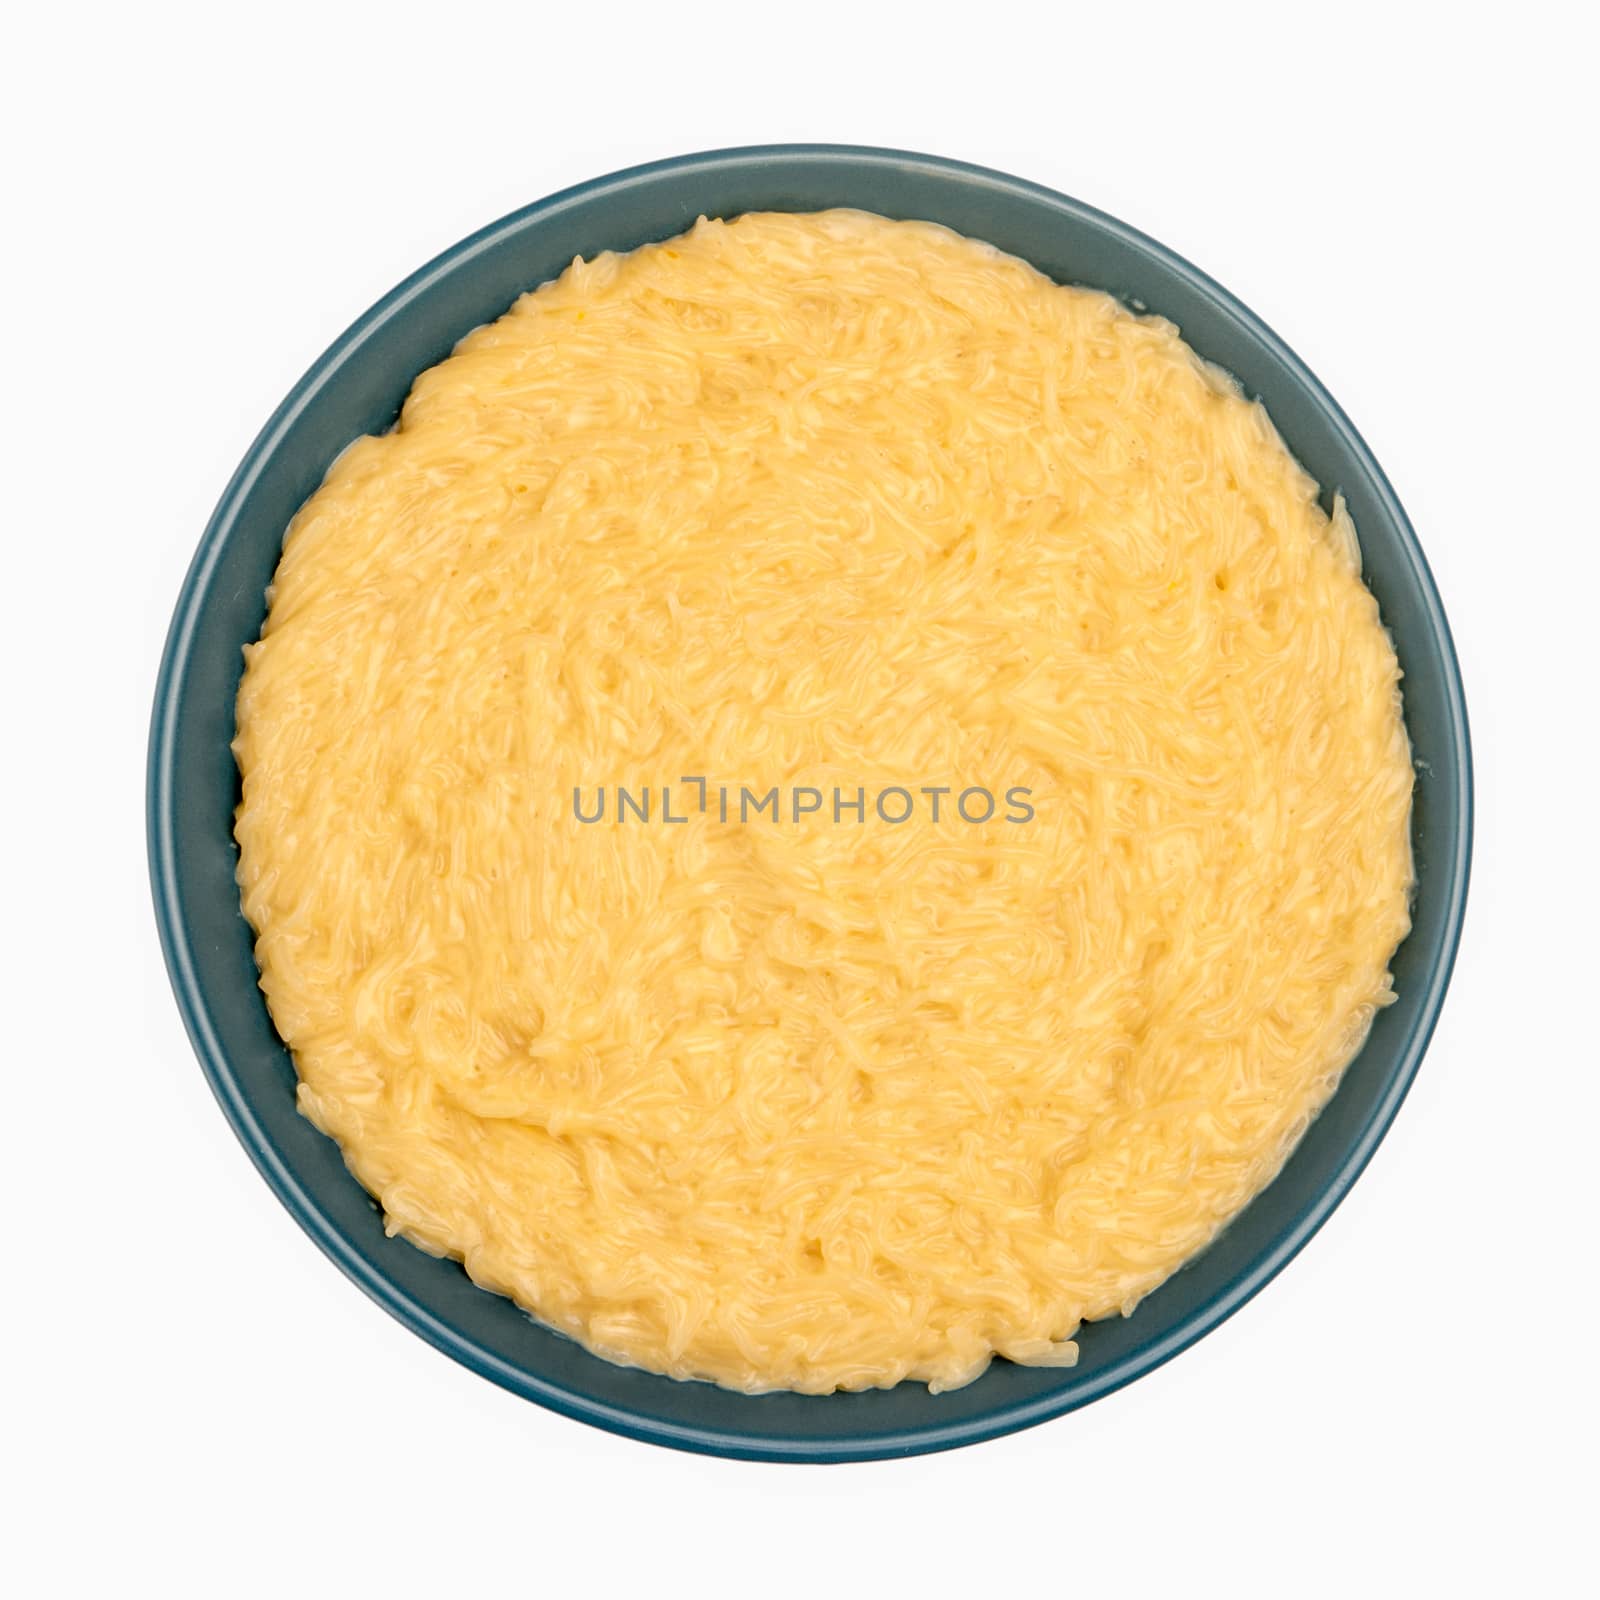 Vermicelli desert on a blue ceramic plate isolated on white background.